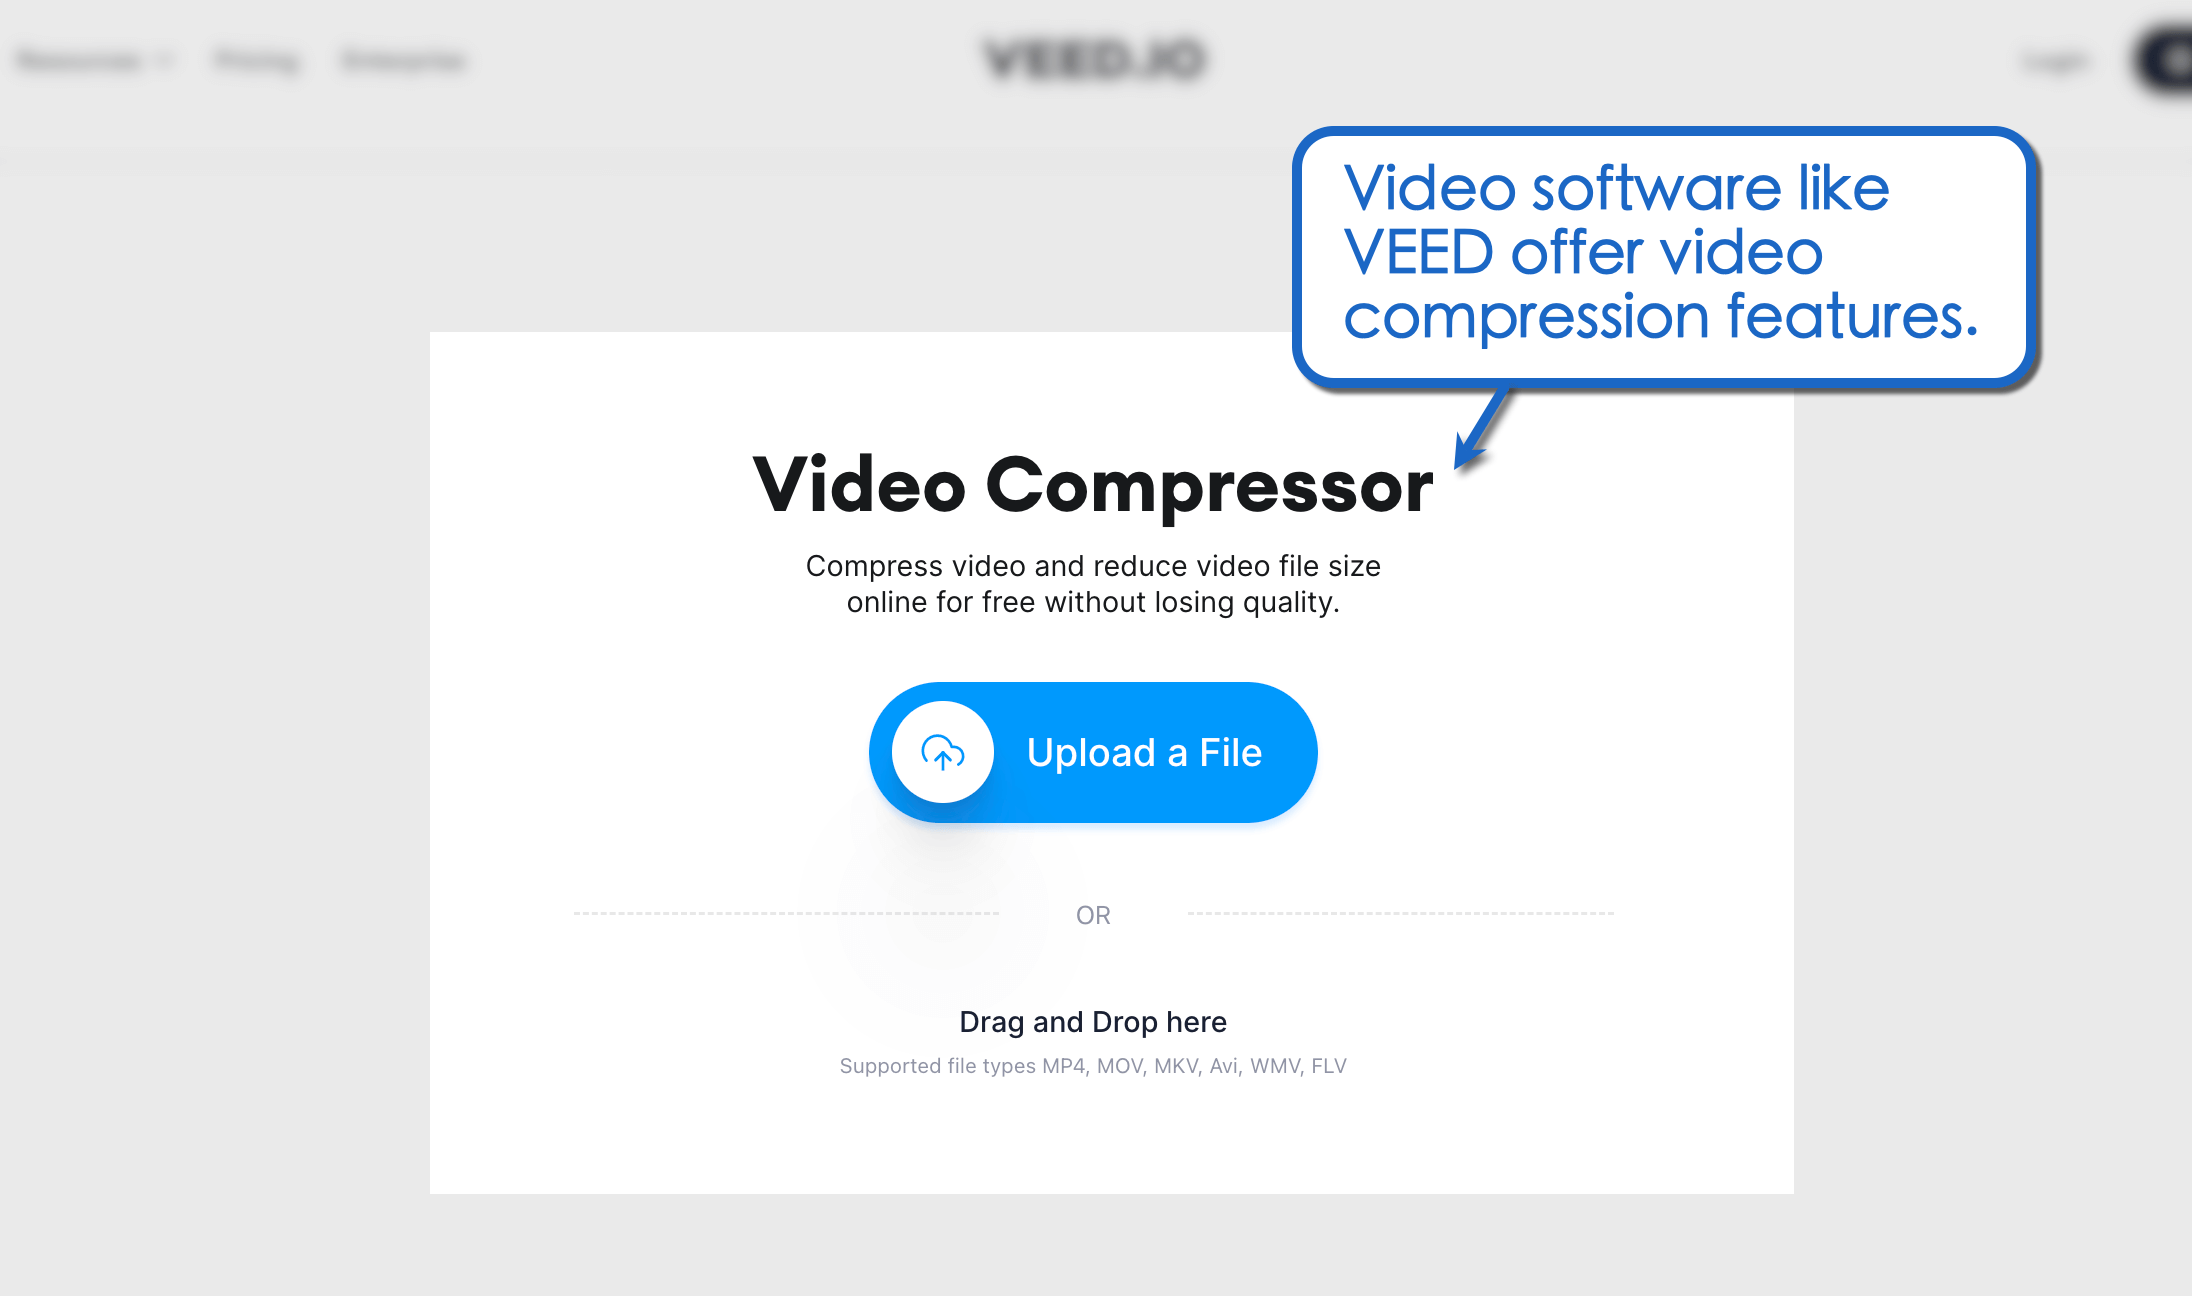 Video compression with VEED.io.